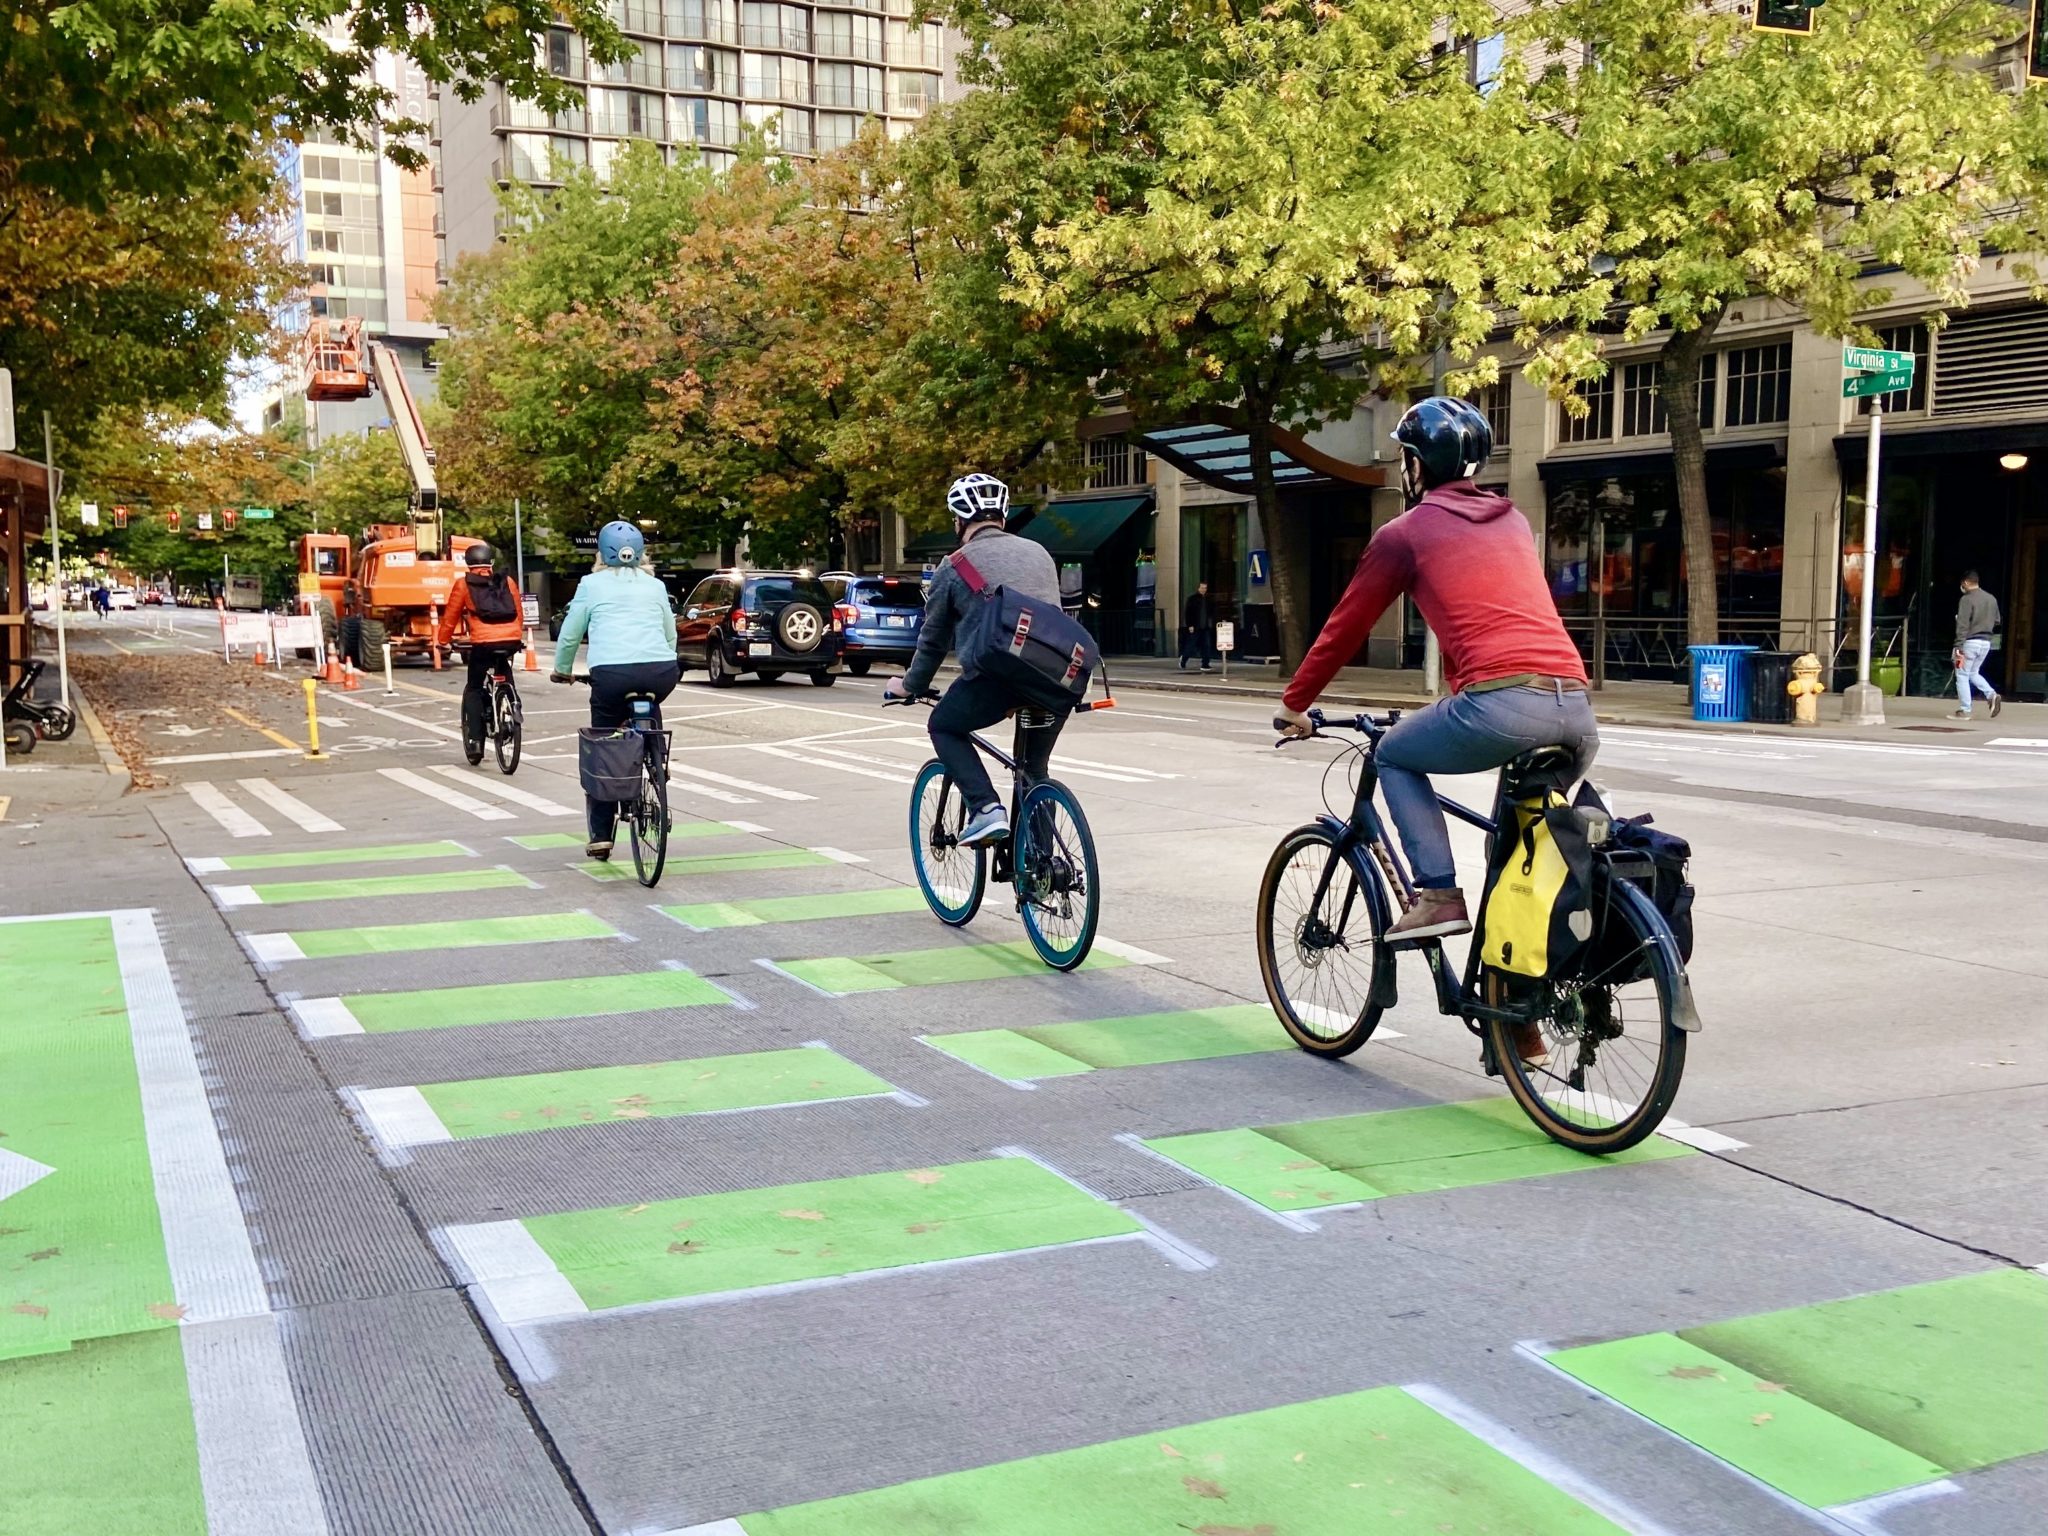 People bicycle along the new 4th Ave protected bike lane in Seattle, which runs from Pioneer Square up to Belltown, near the Uptown and and Seattle Center area. In the photo, four bicyclists are traveling away from the camera, using the protected bike lane.